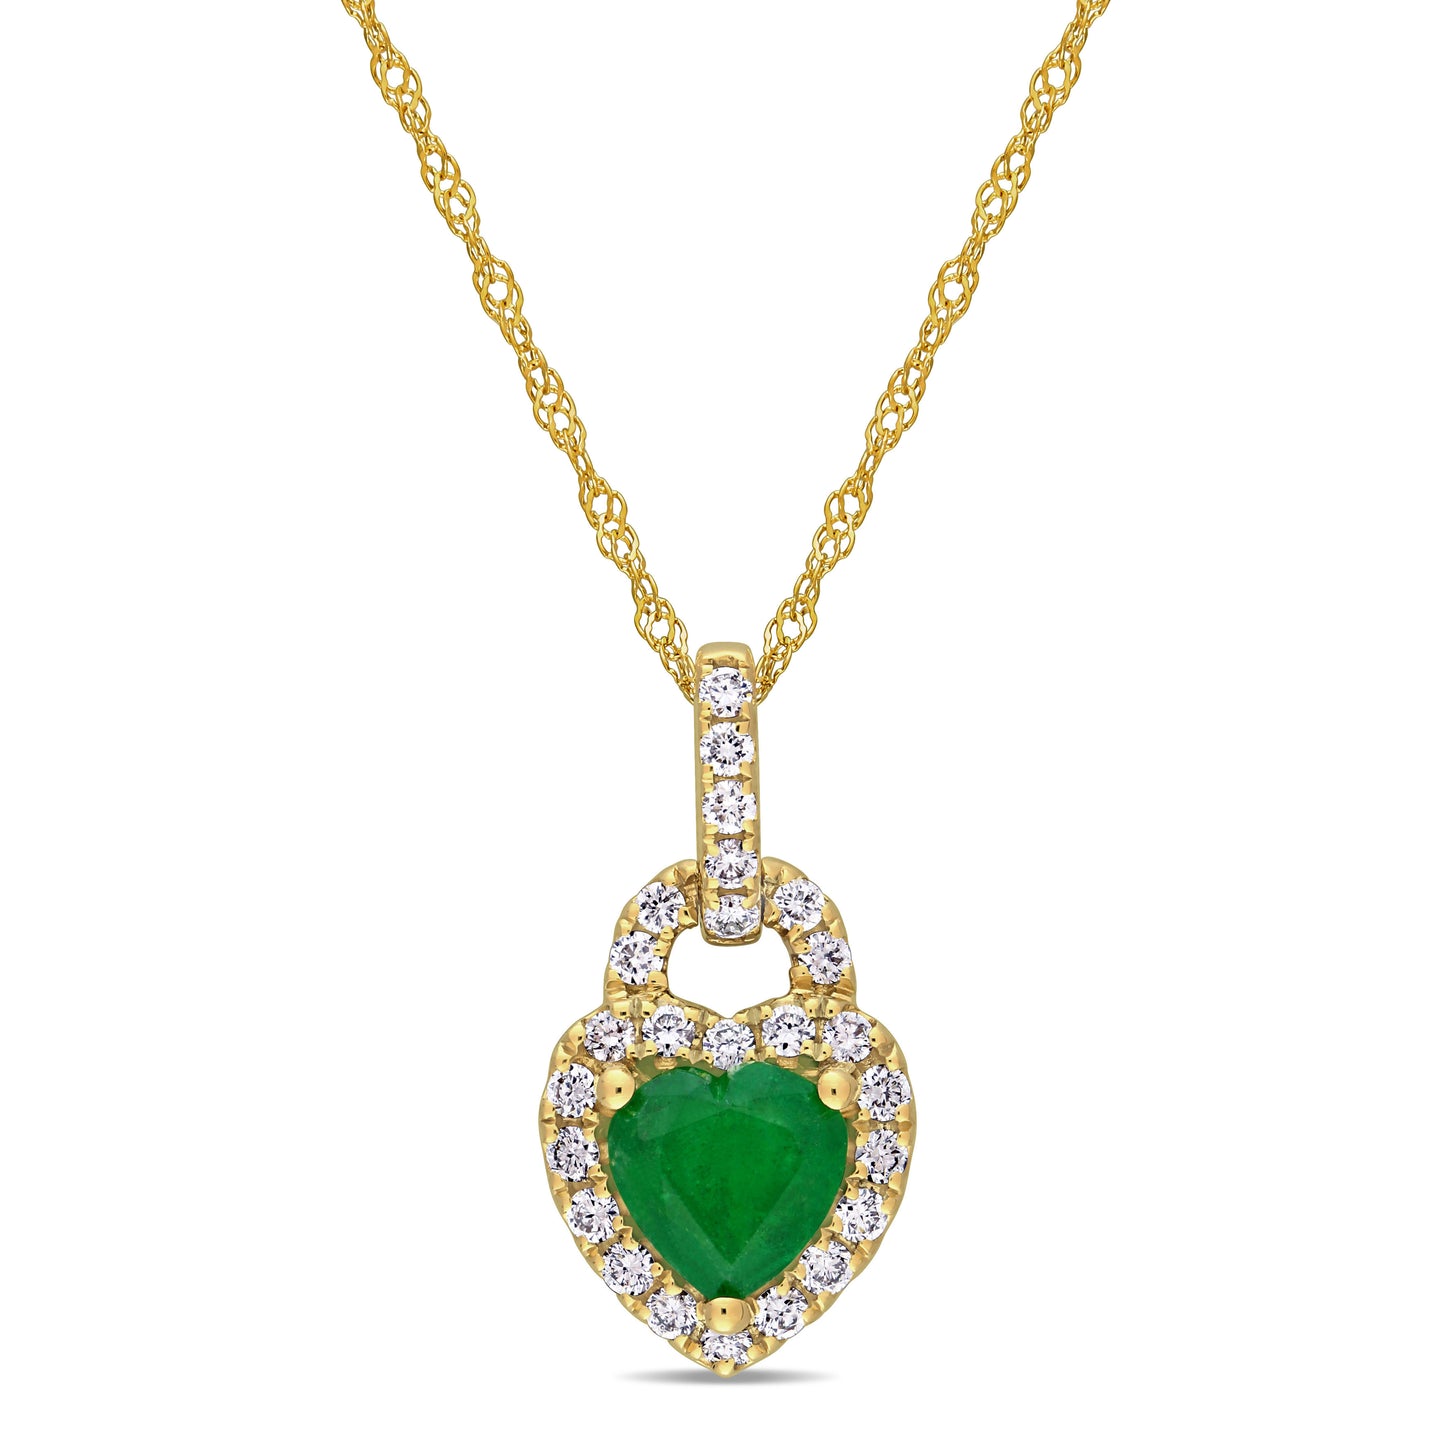 Emerald & Diamond Necklace in 14k Yellow Gold